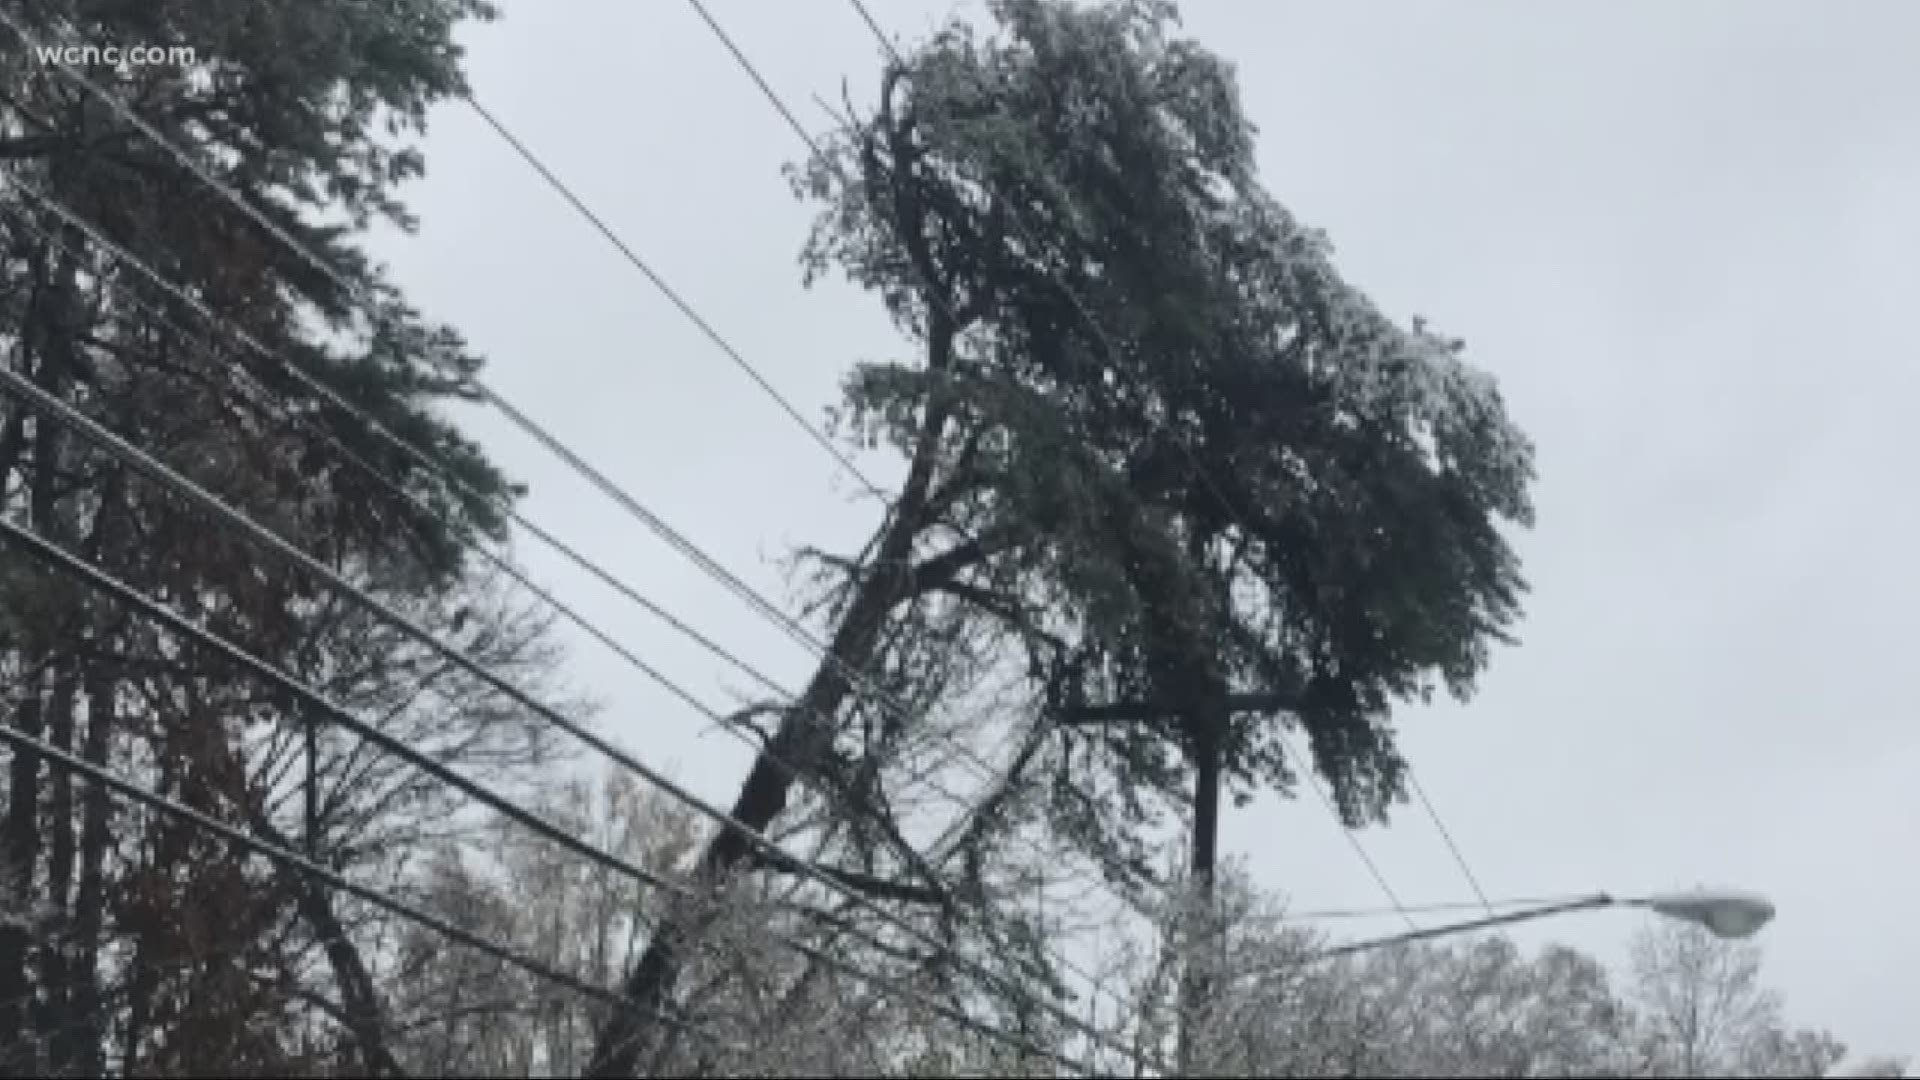 There are over 7,000 outages in Mecklenburg County as of Sunday evening.